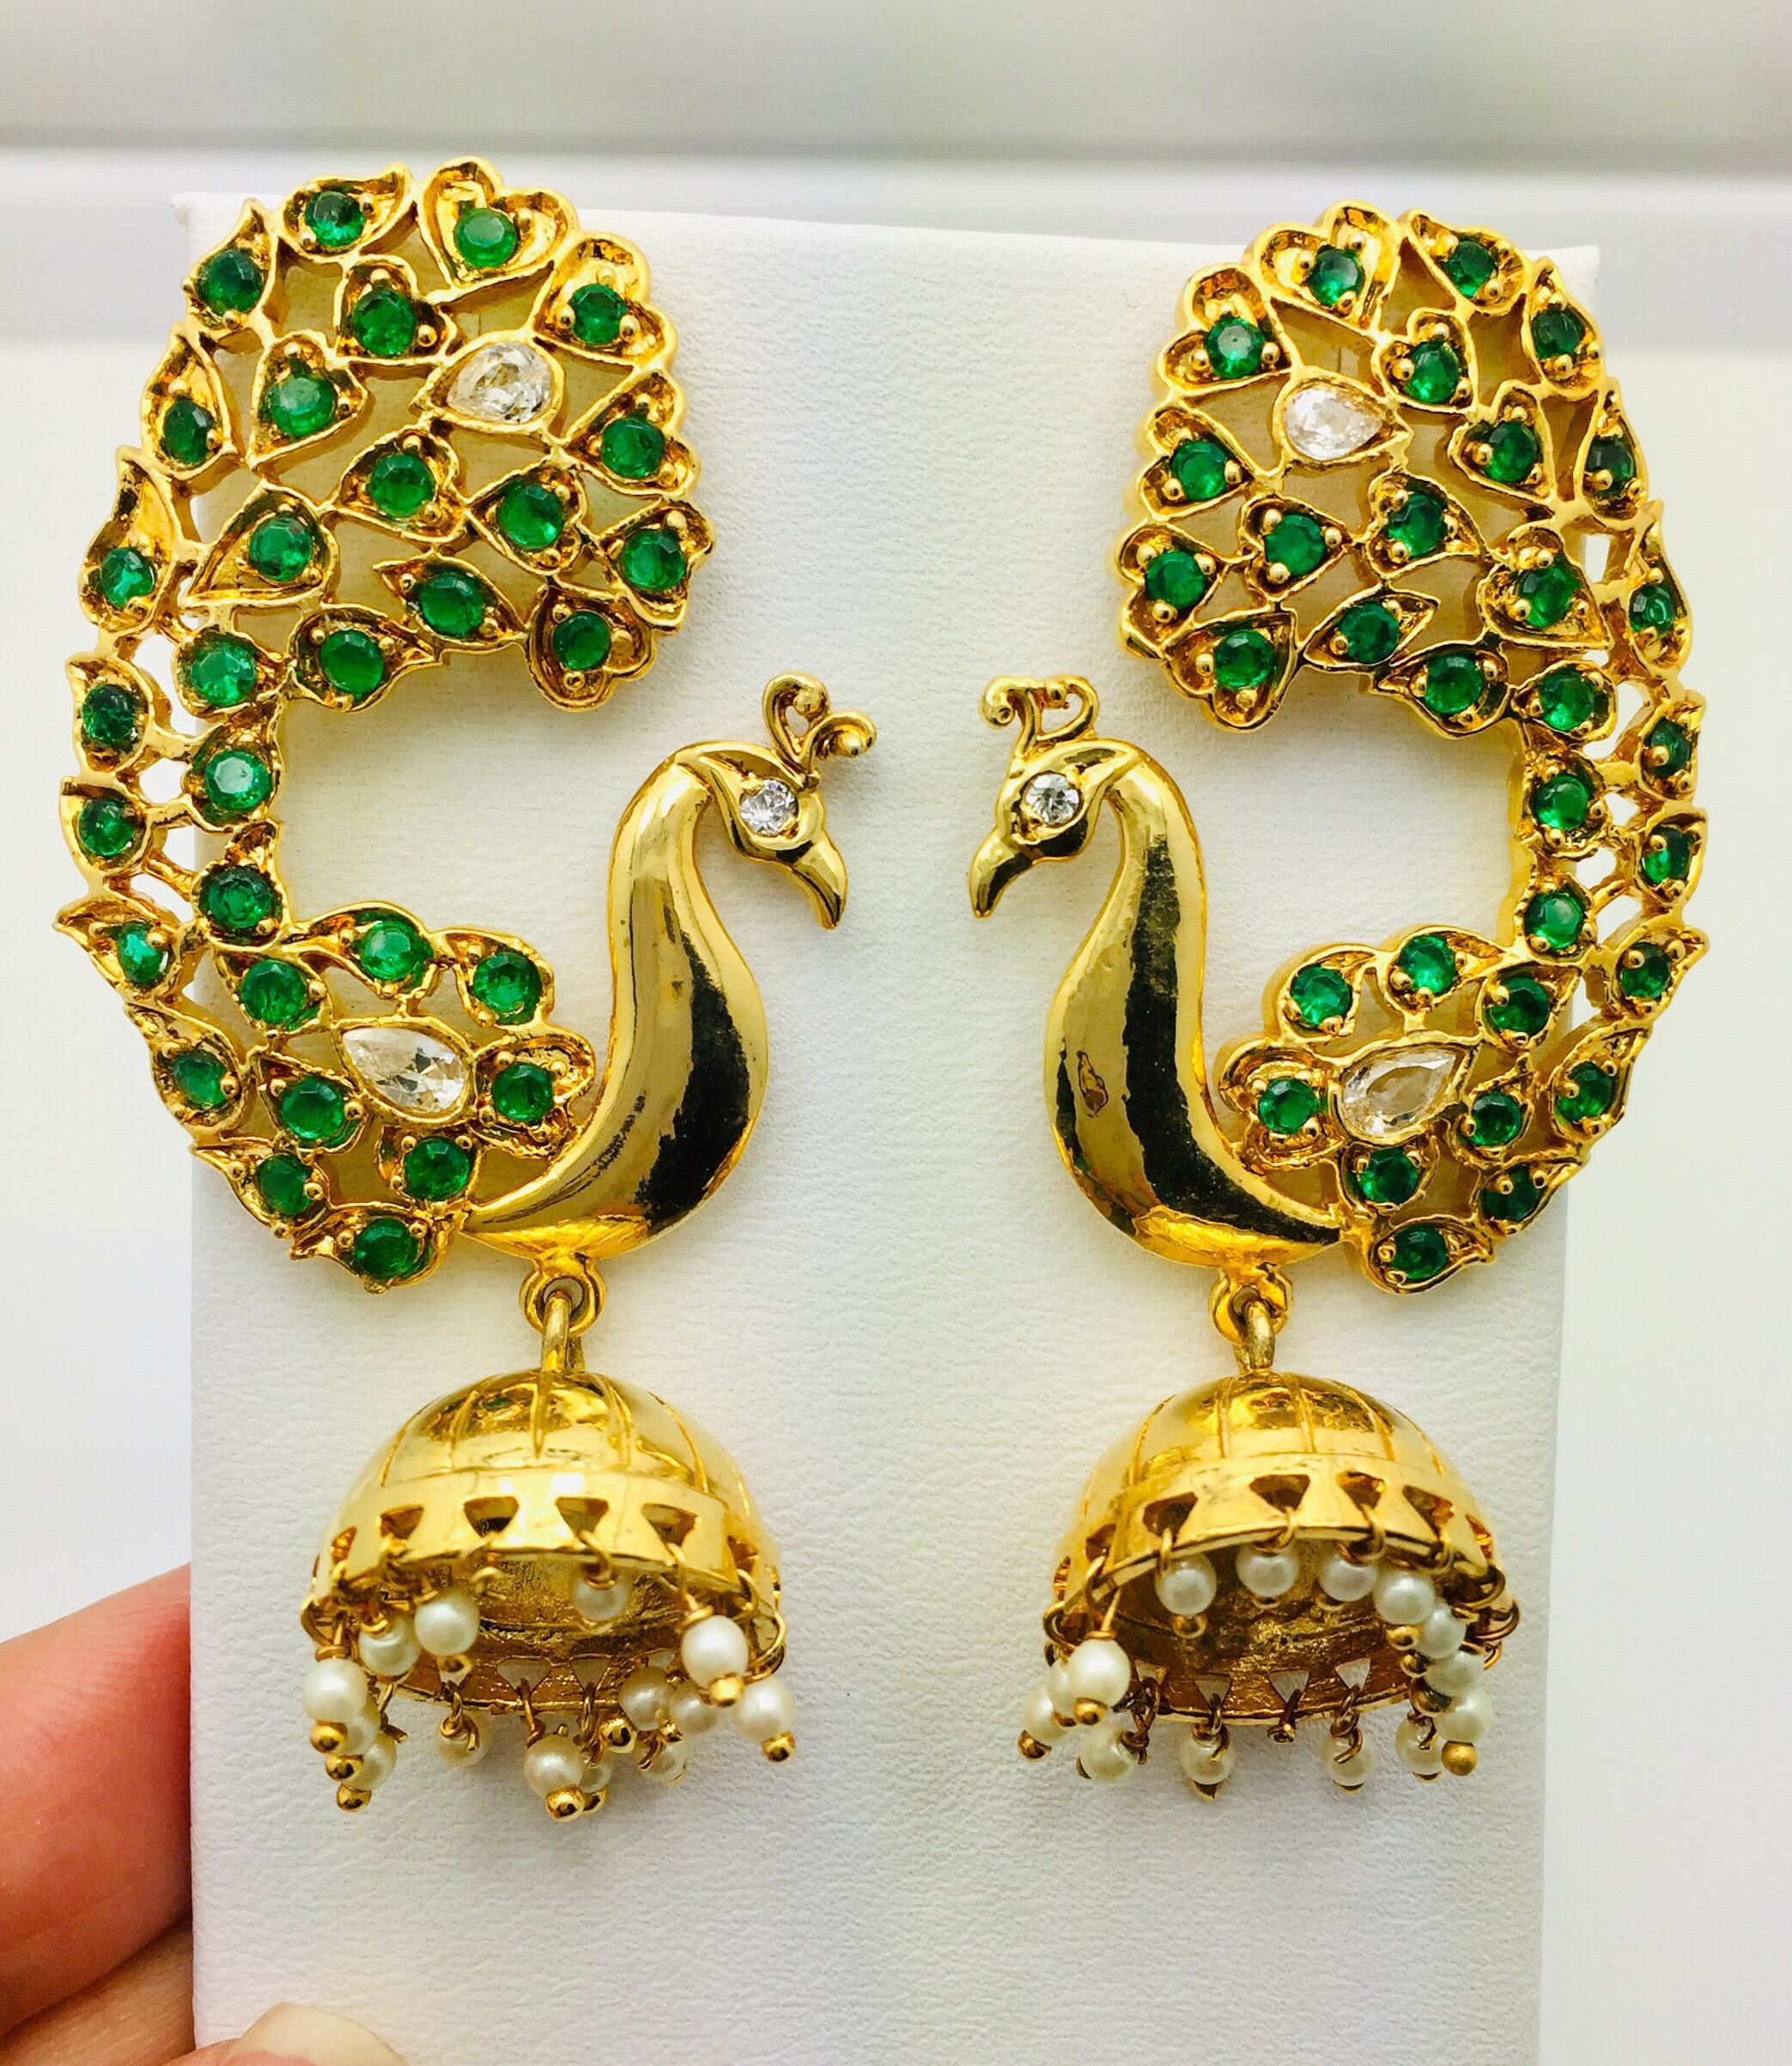 Strut your stuff in these handmade peacock earrings embellished with faux emerald, cubic zircons and pearls. As you can see, the novel creation features a standout design that incorporates some super stylish elements. These earrings fasten with post